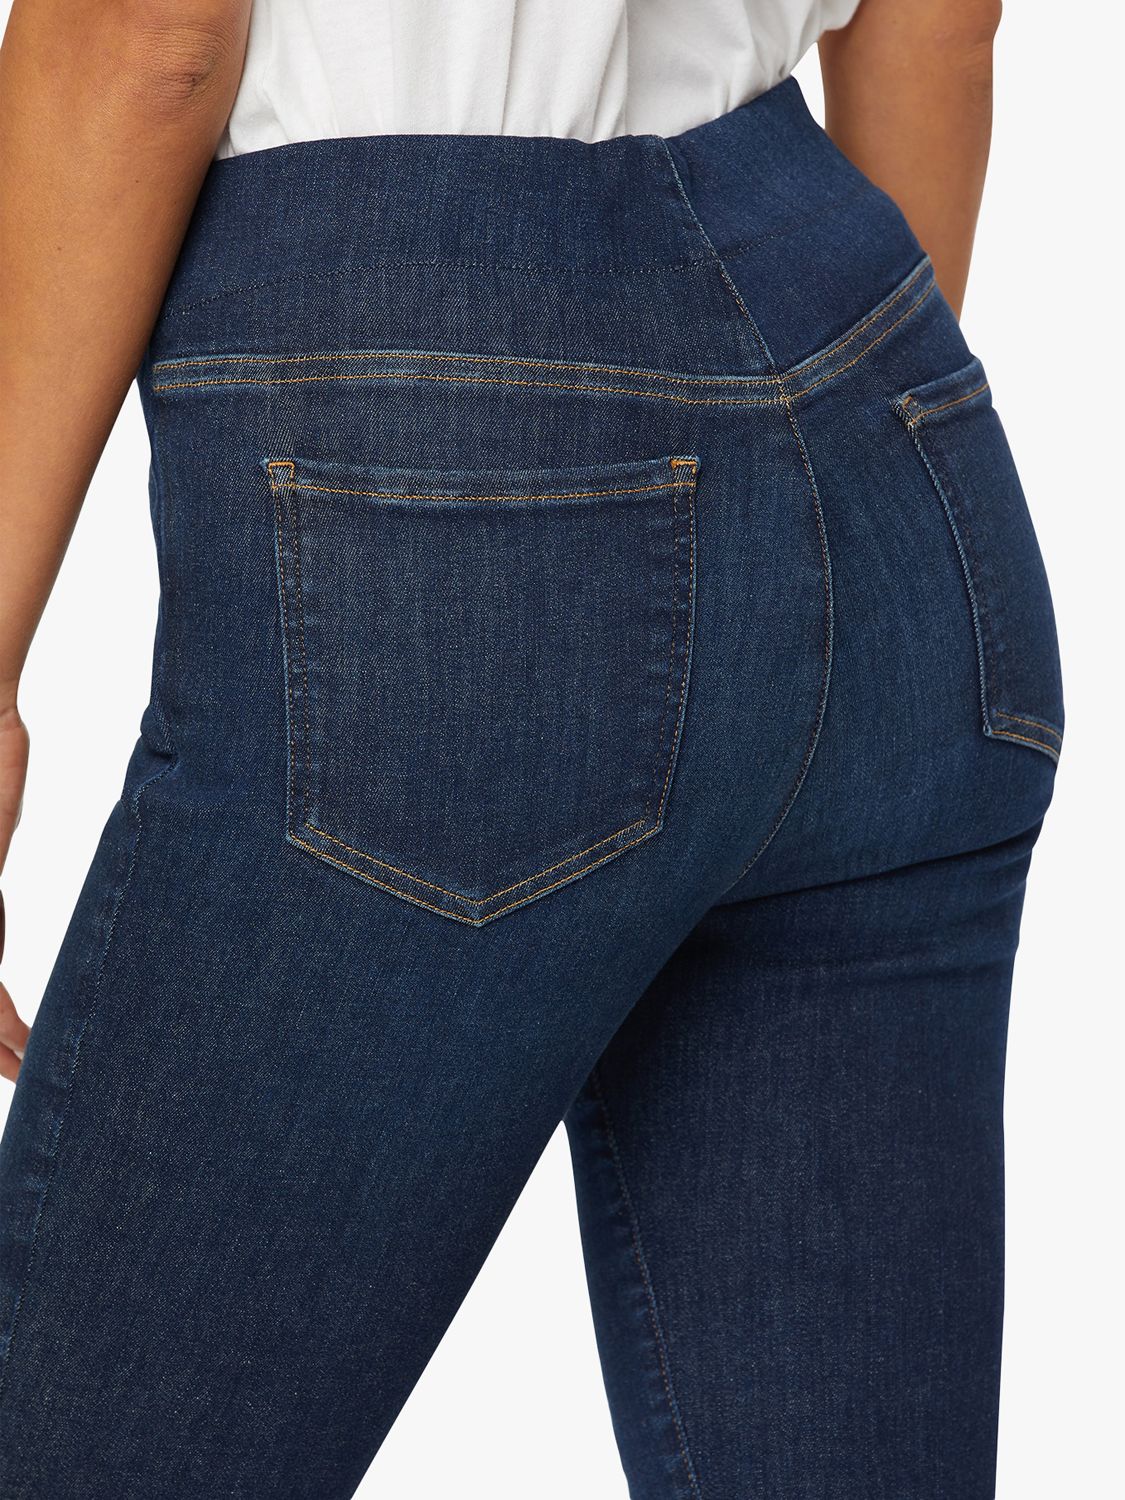 Super Skinny Ankle Pull-On Jeans In Petite In SpanSpring™ Denim With Side  Slits - Clean Allure Blue | NYDJ